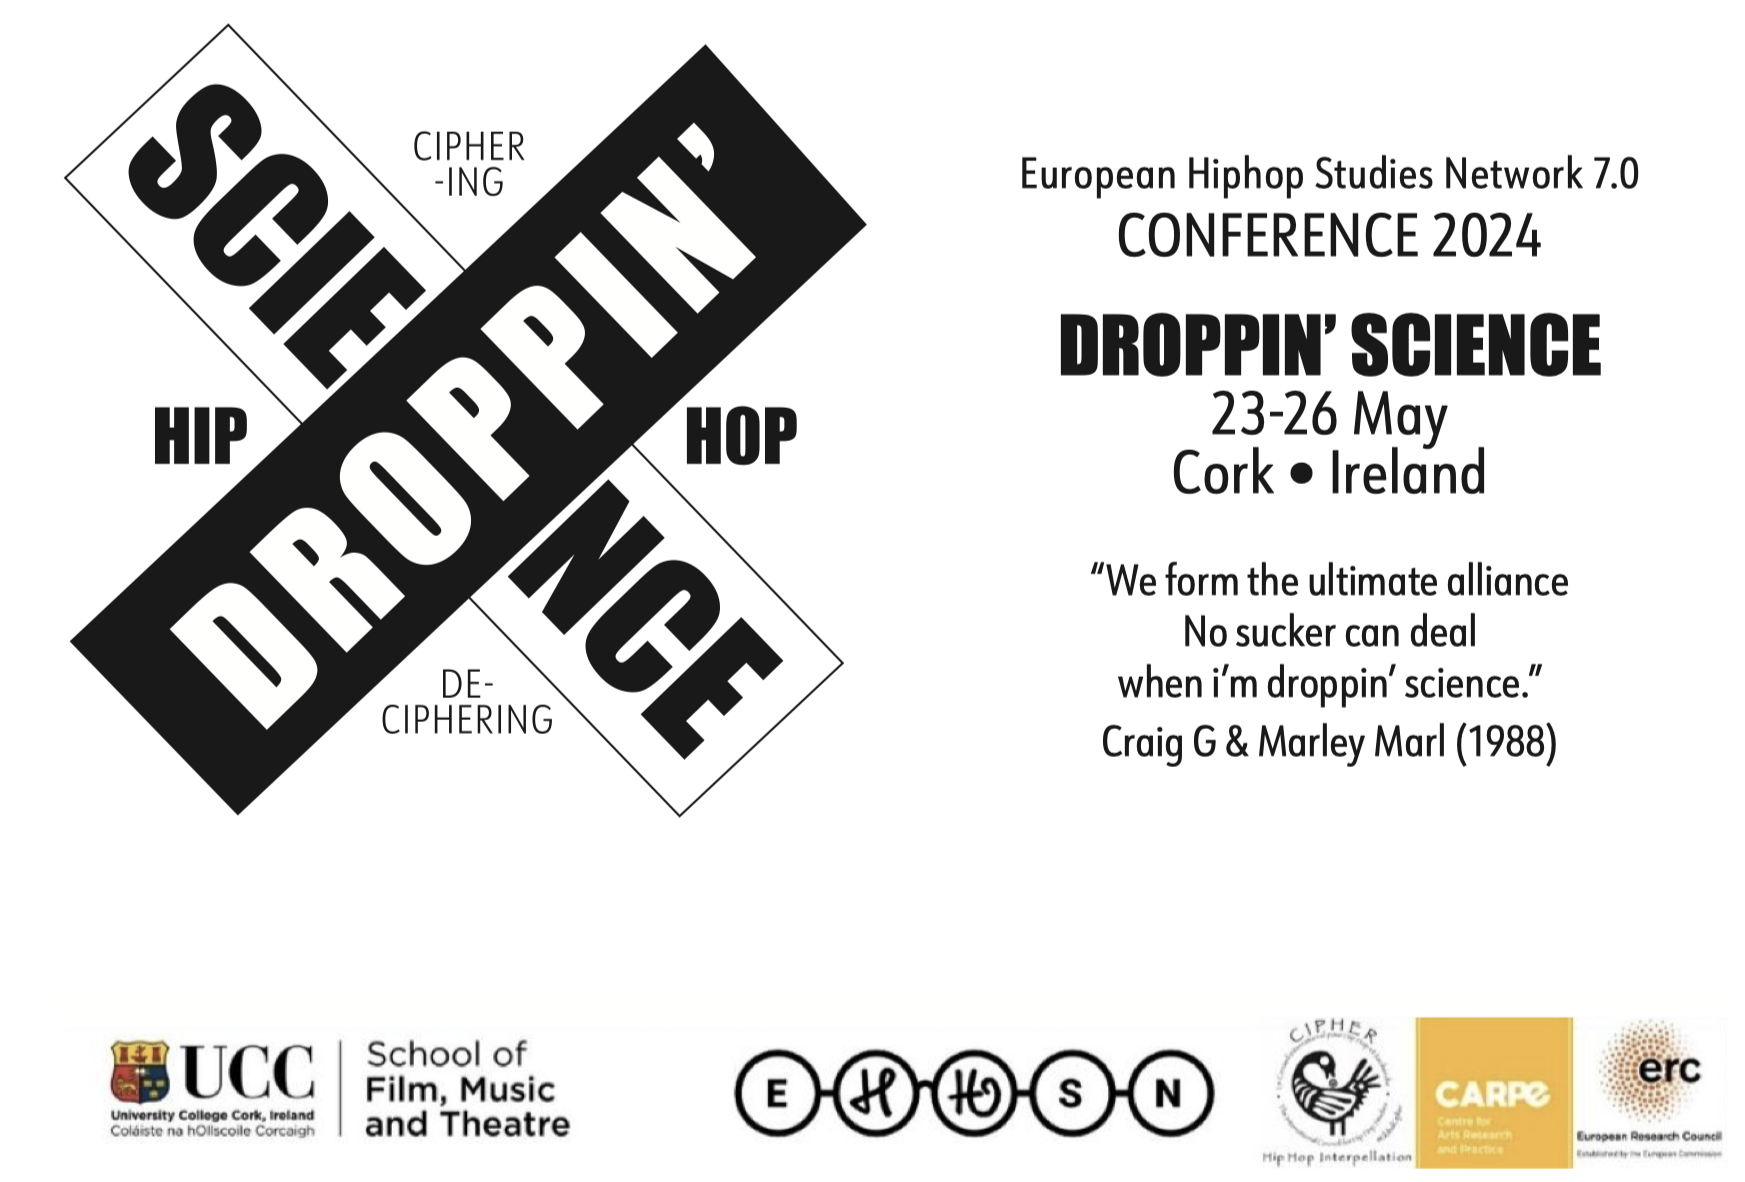 Droppin' Science - European Hip-Hop Studies Network Conference 2024 - The Granary, 23-26 May